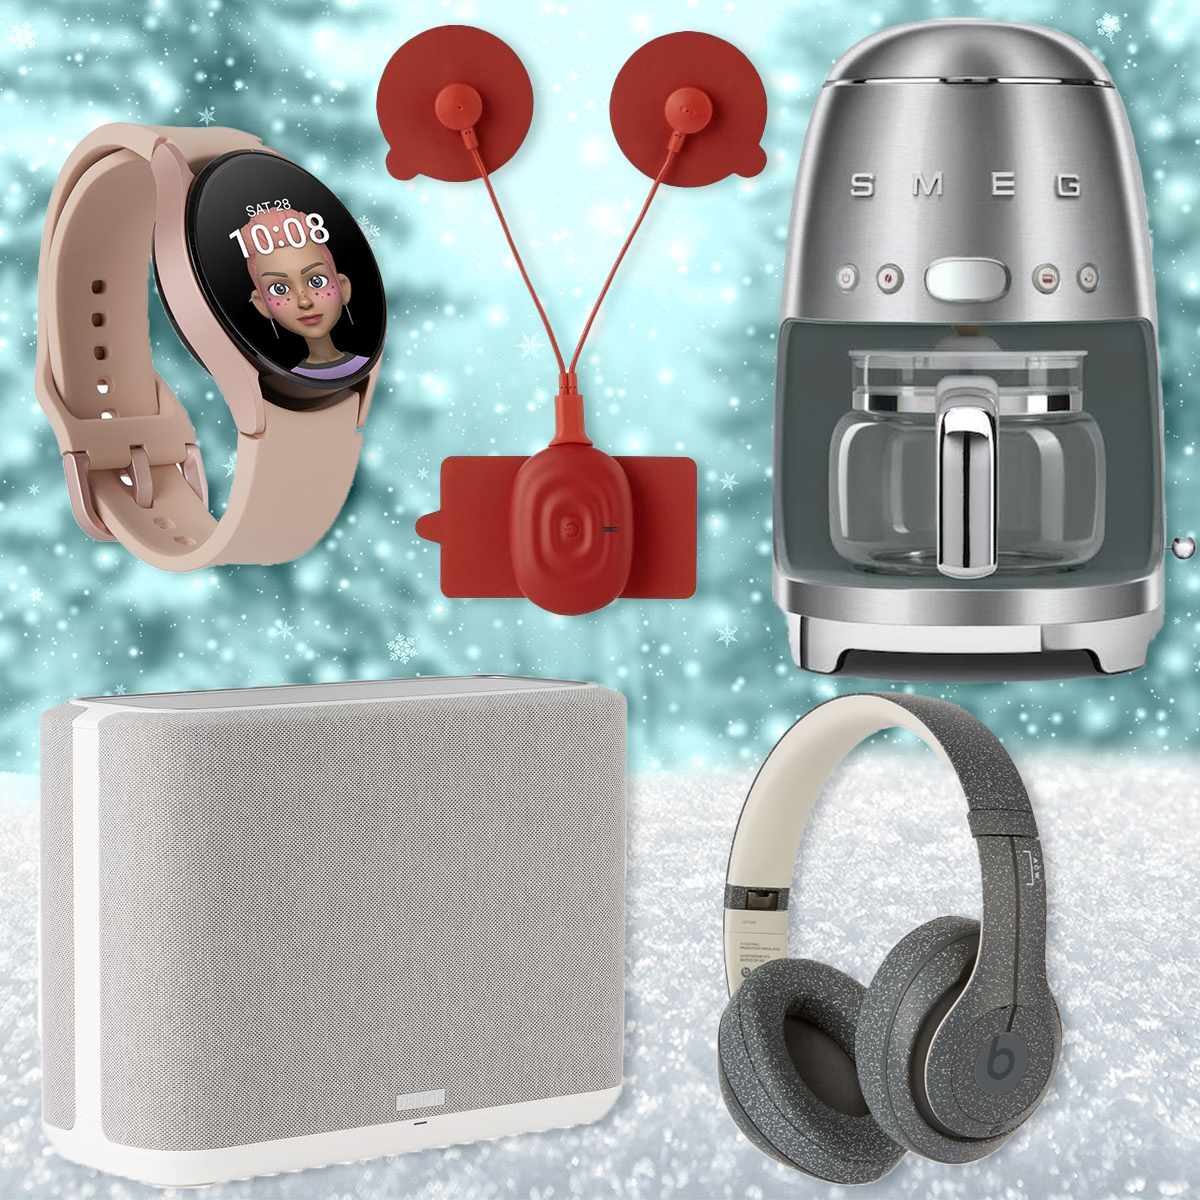 Gifts For The Techie: Google Nest, Beats By Dre, Samsung, SMEG